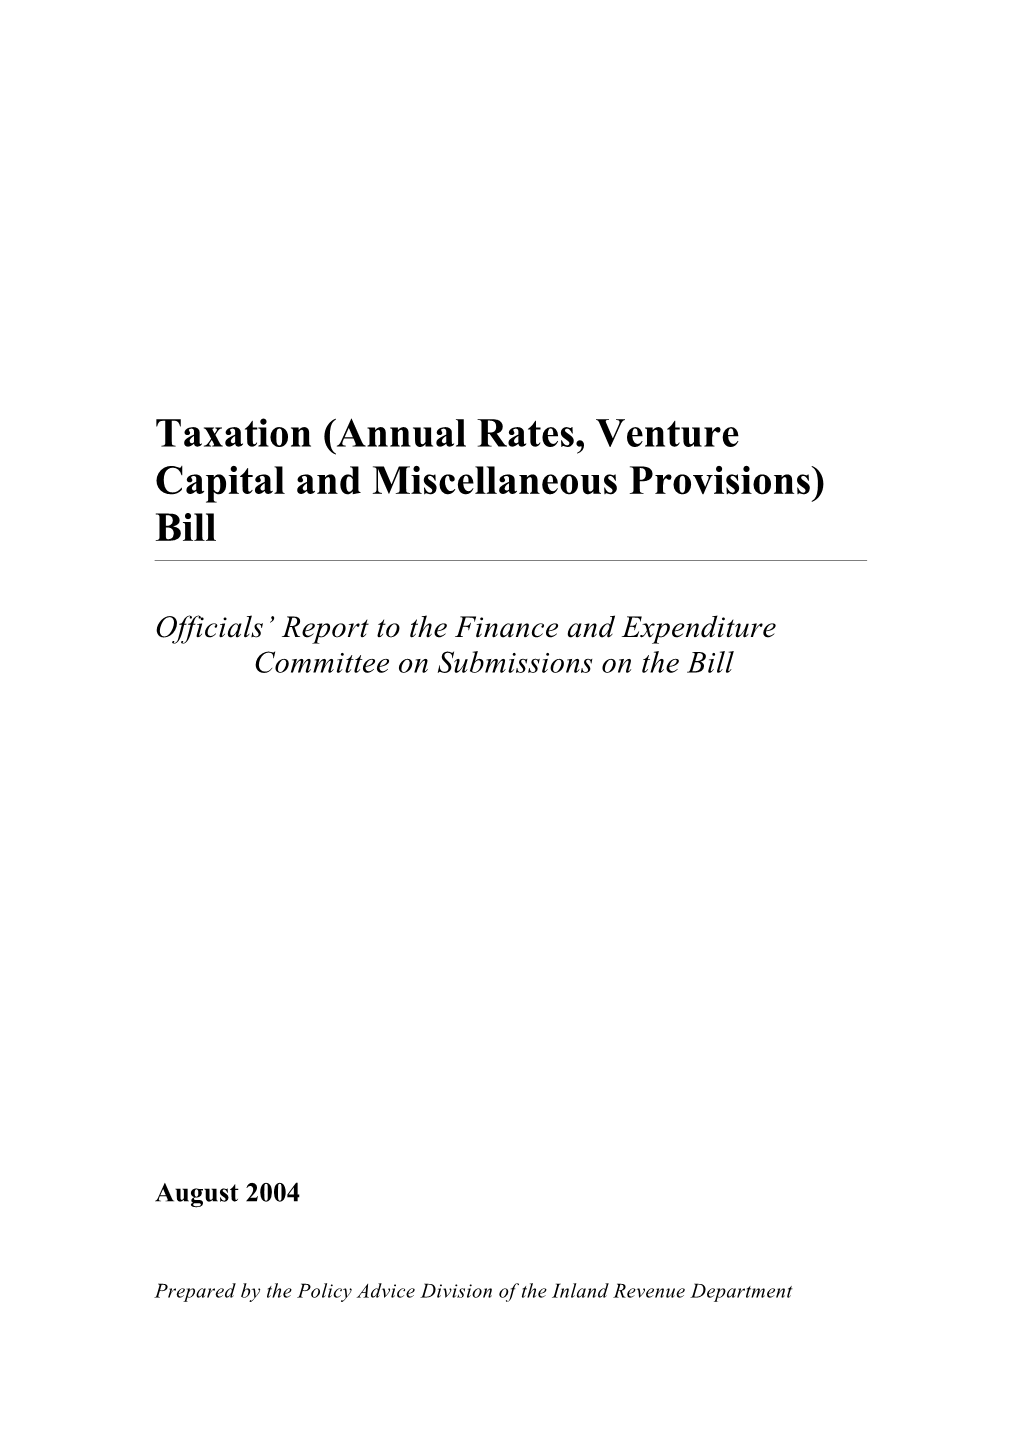 Taxation (Annual Rates, Venture Capital and Miscellaneous Provisions) Bill